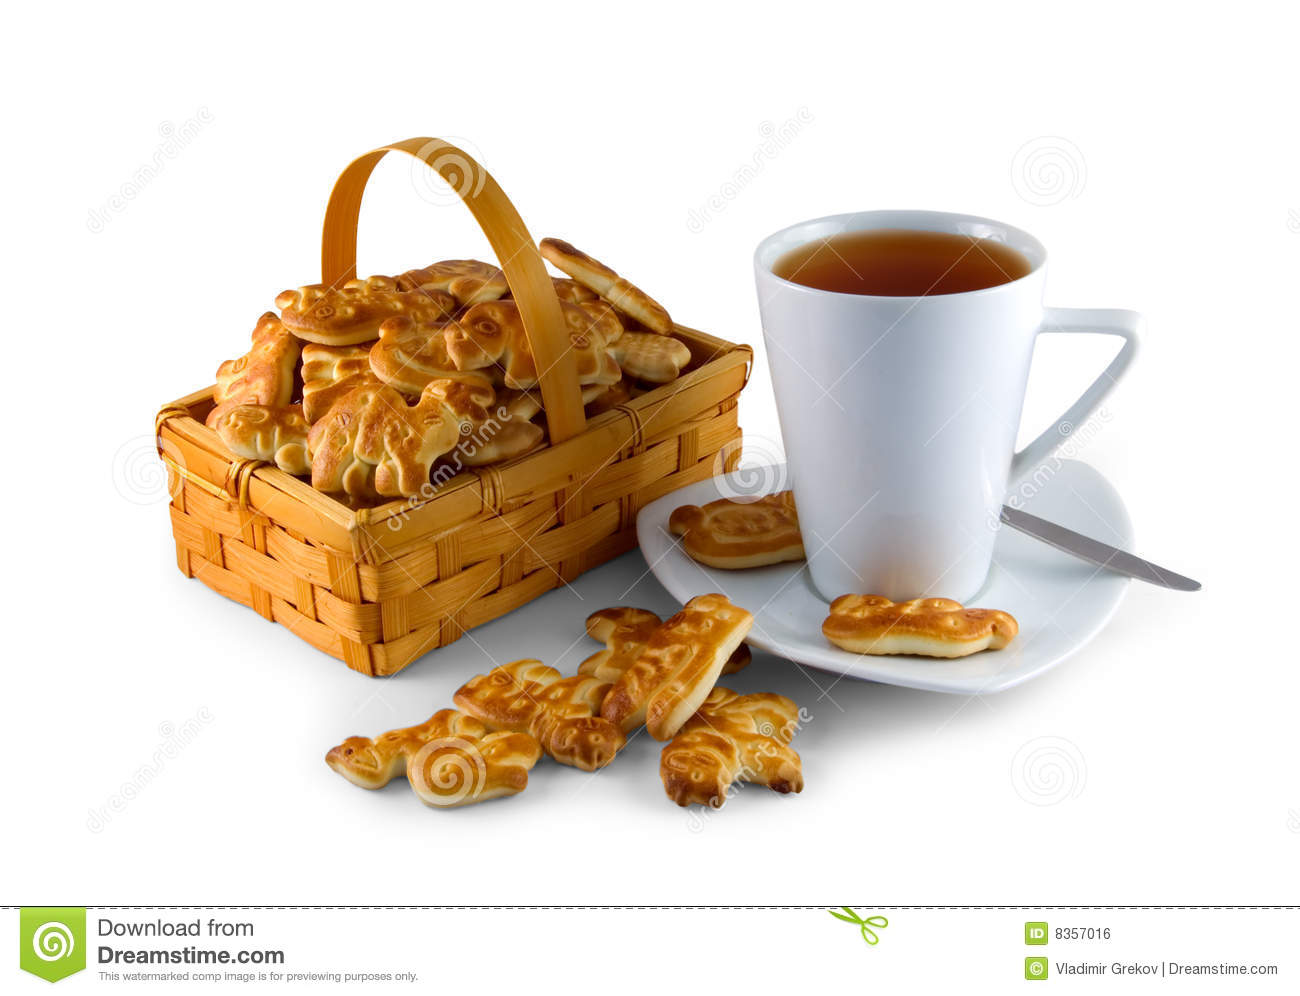 Tea And Cookies Royalty Free Stock Image   Image  8357016